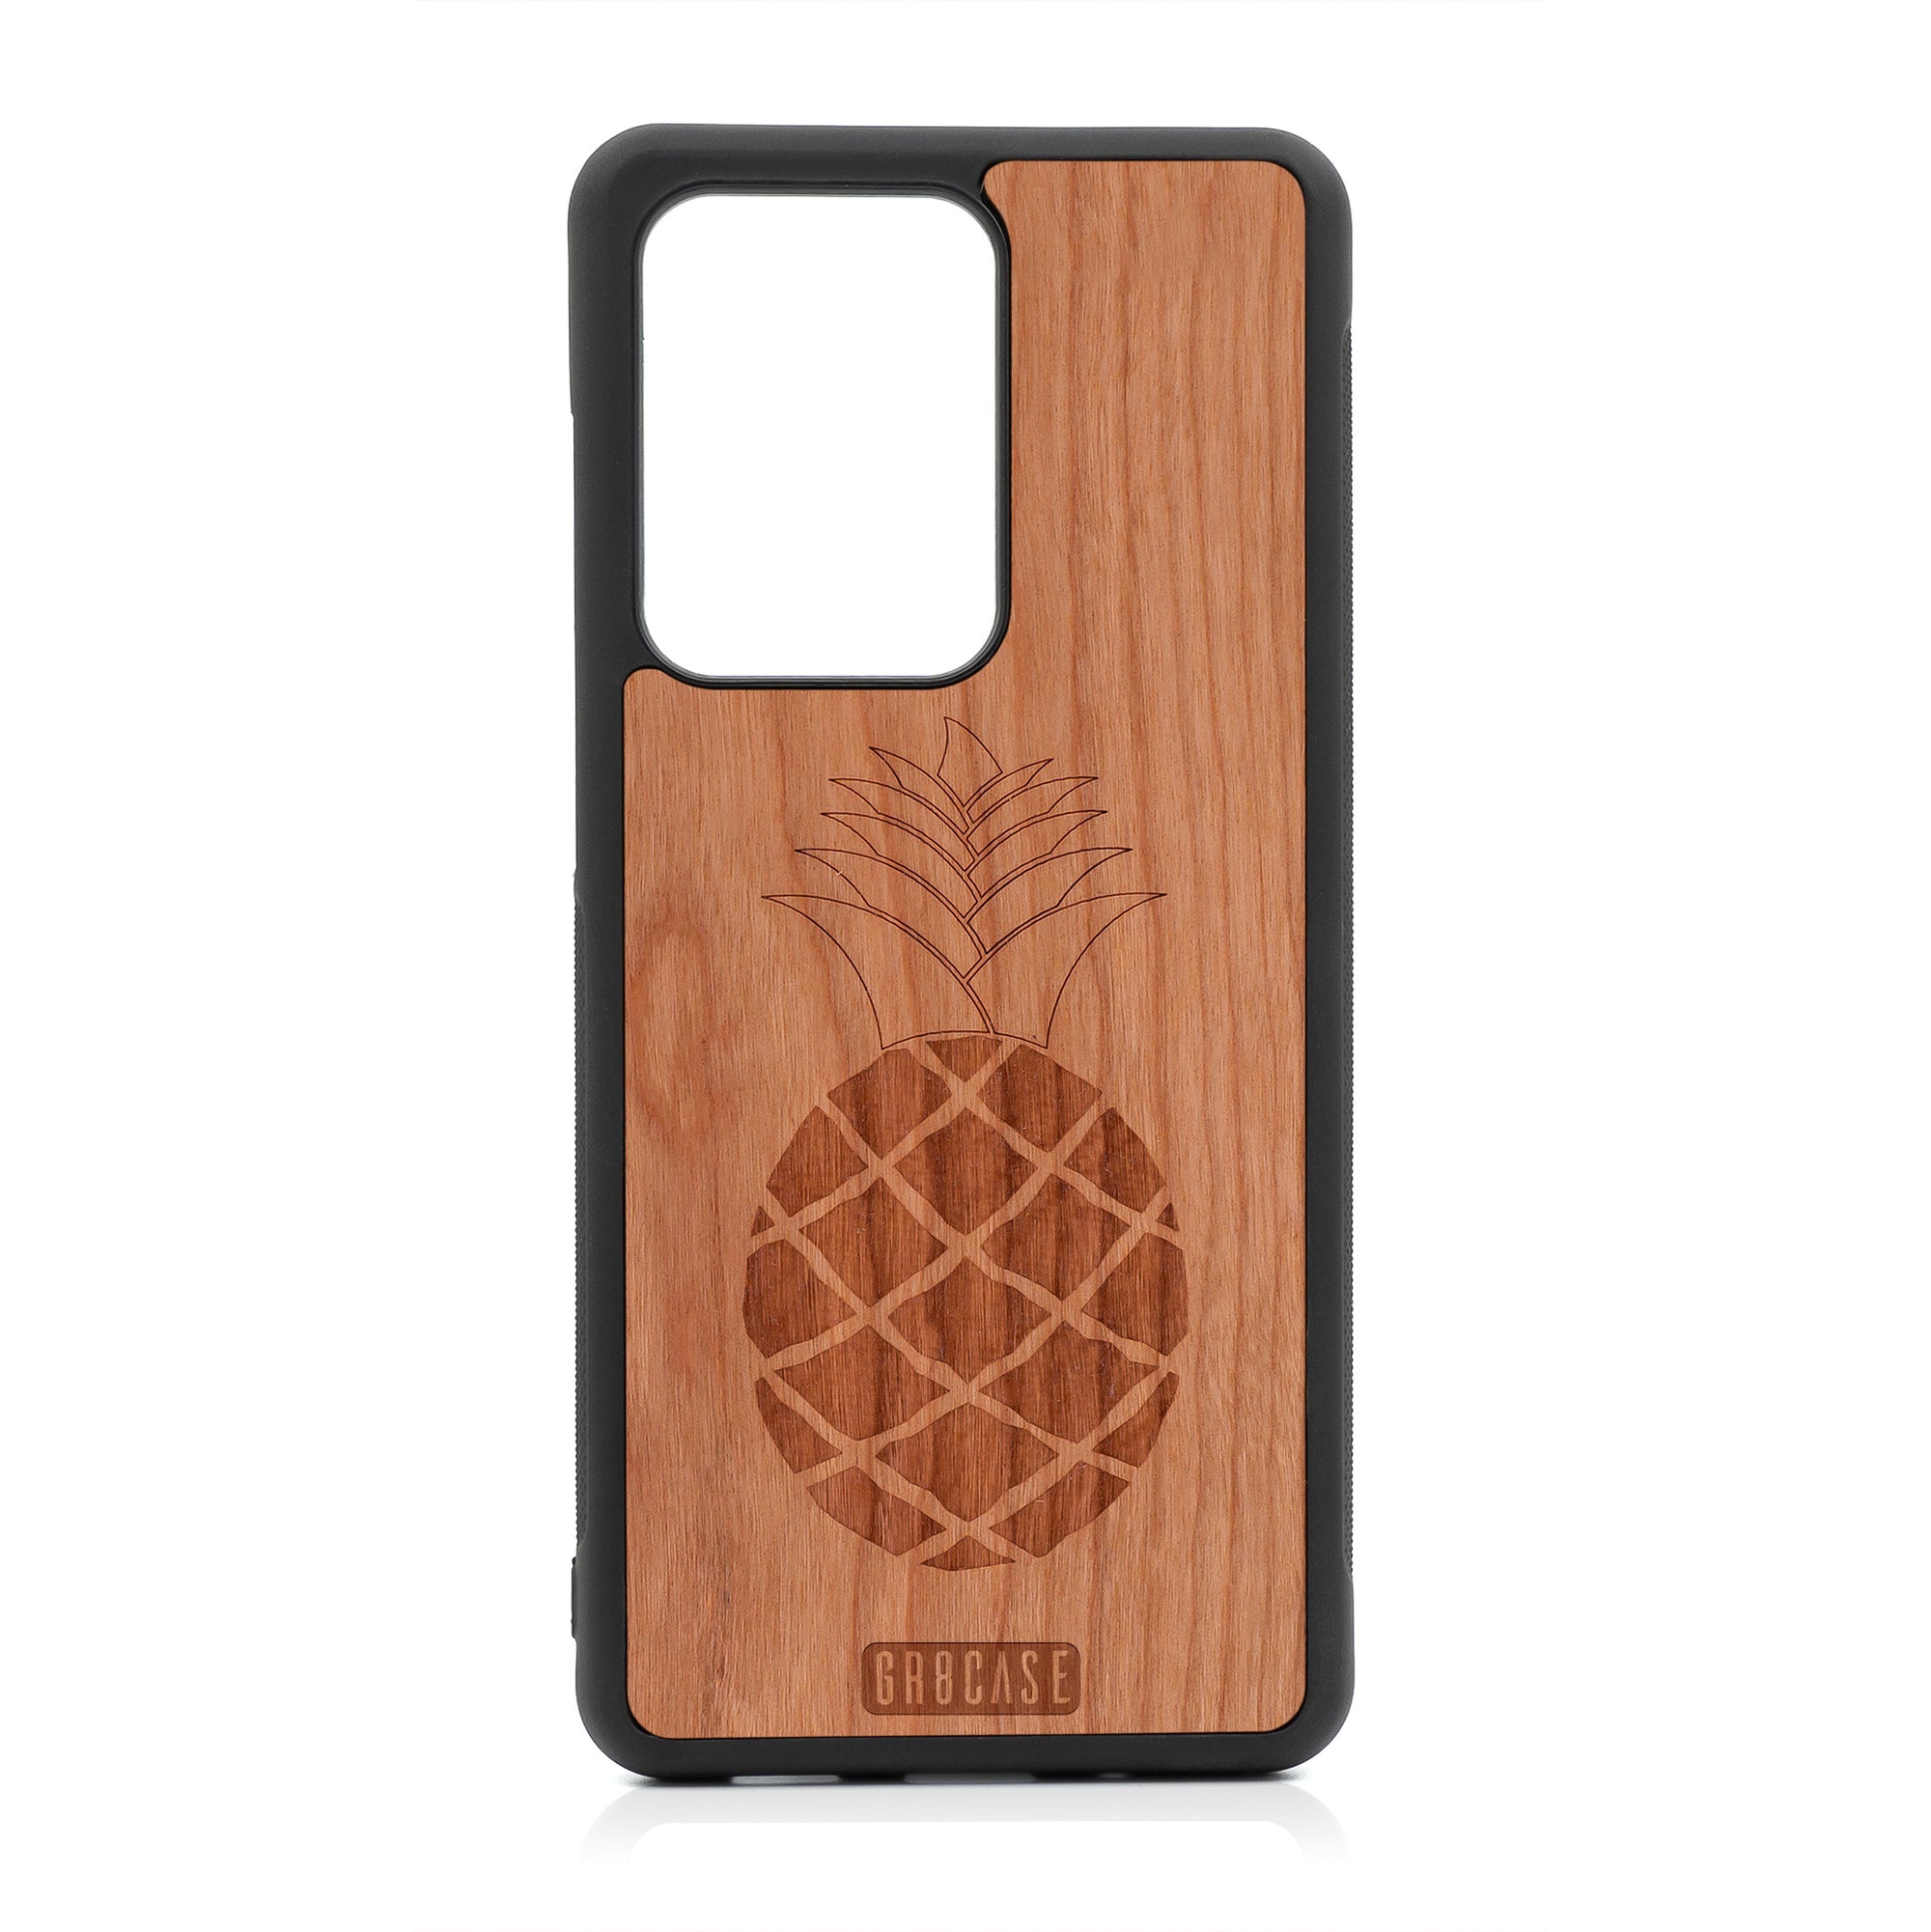 Pineapple Design Wood Case For Samsung Galaxy S20 Ultra by GR8CASE